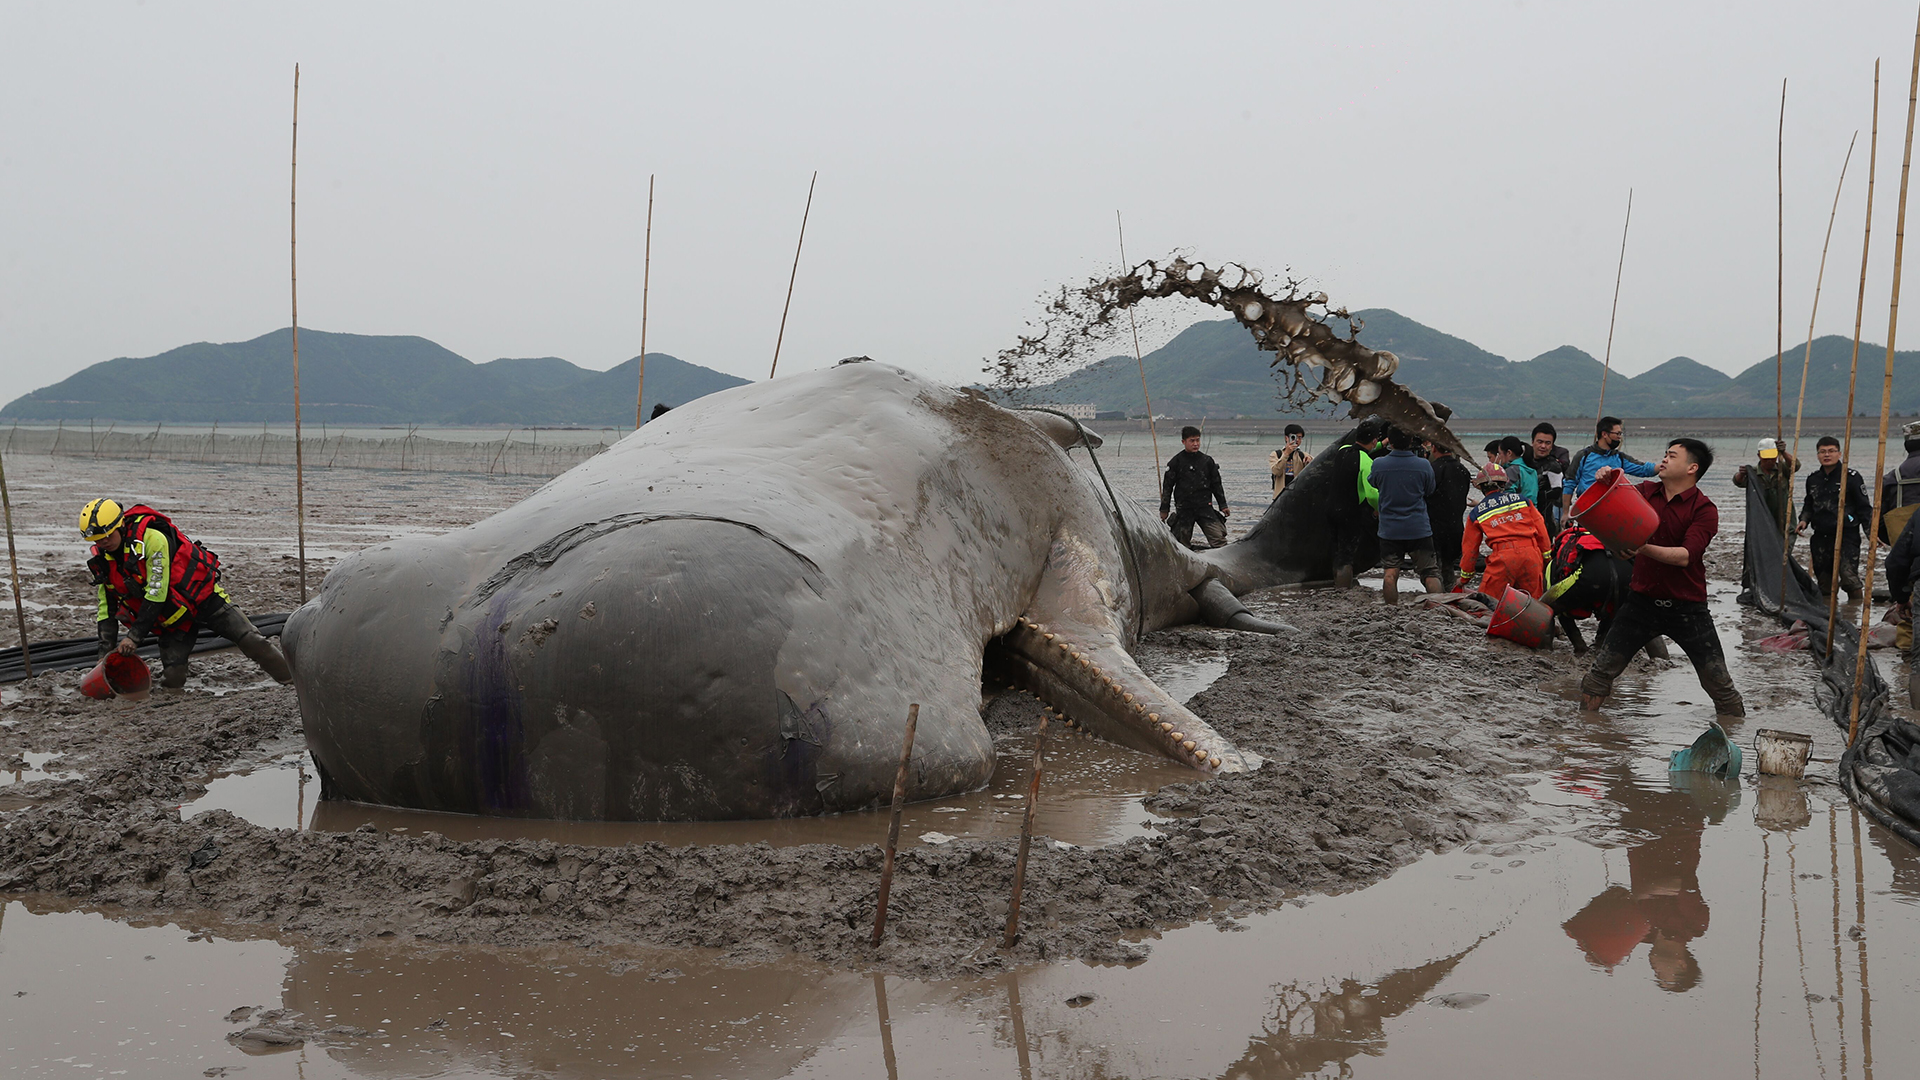 Rescuers near Ningbo, China, attempt to keep a beached sperm whale cool as they wait for the tide to rise enough to tow the stricken animal back to sea.